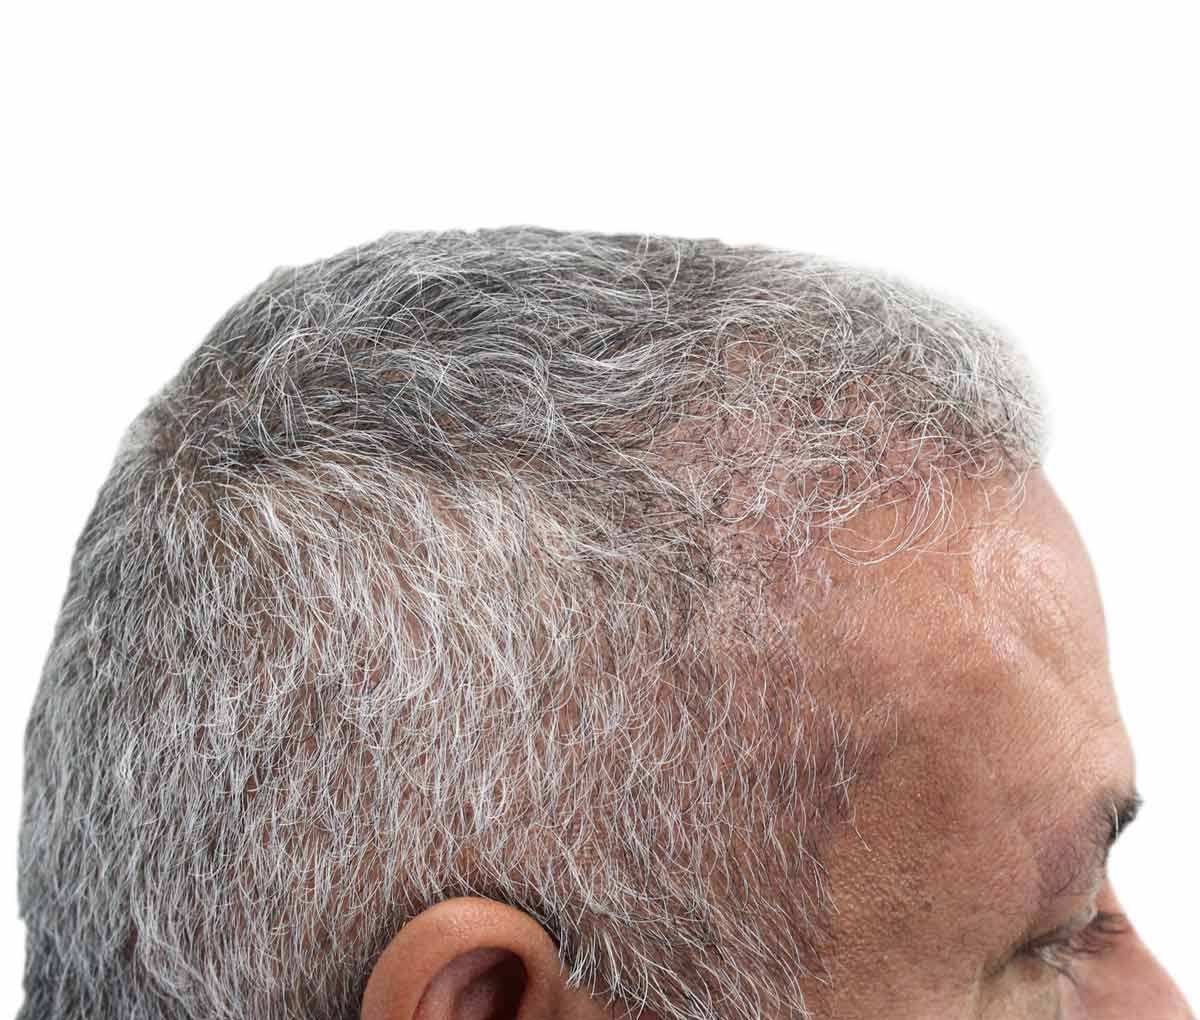 a close up of a man 's head with gray hair and a beard .